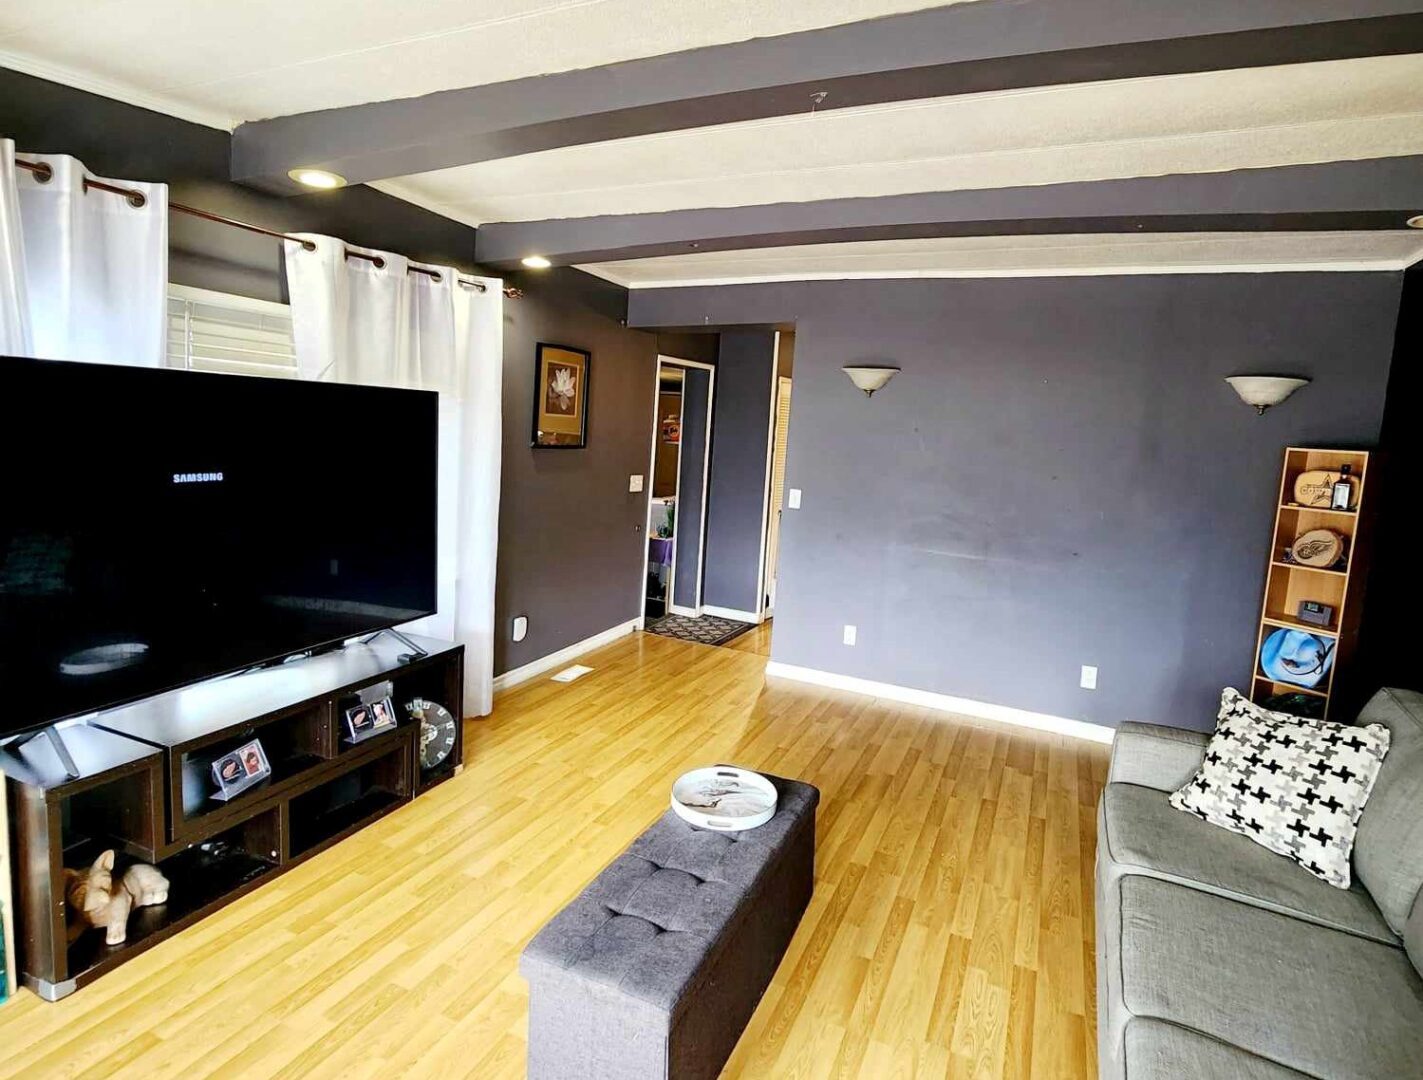 A living room with gray walls and hardwood floors.